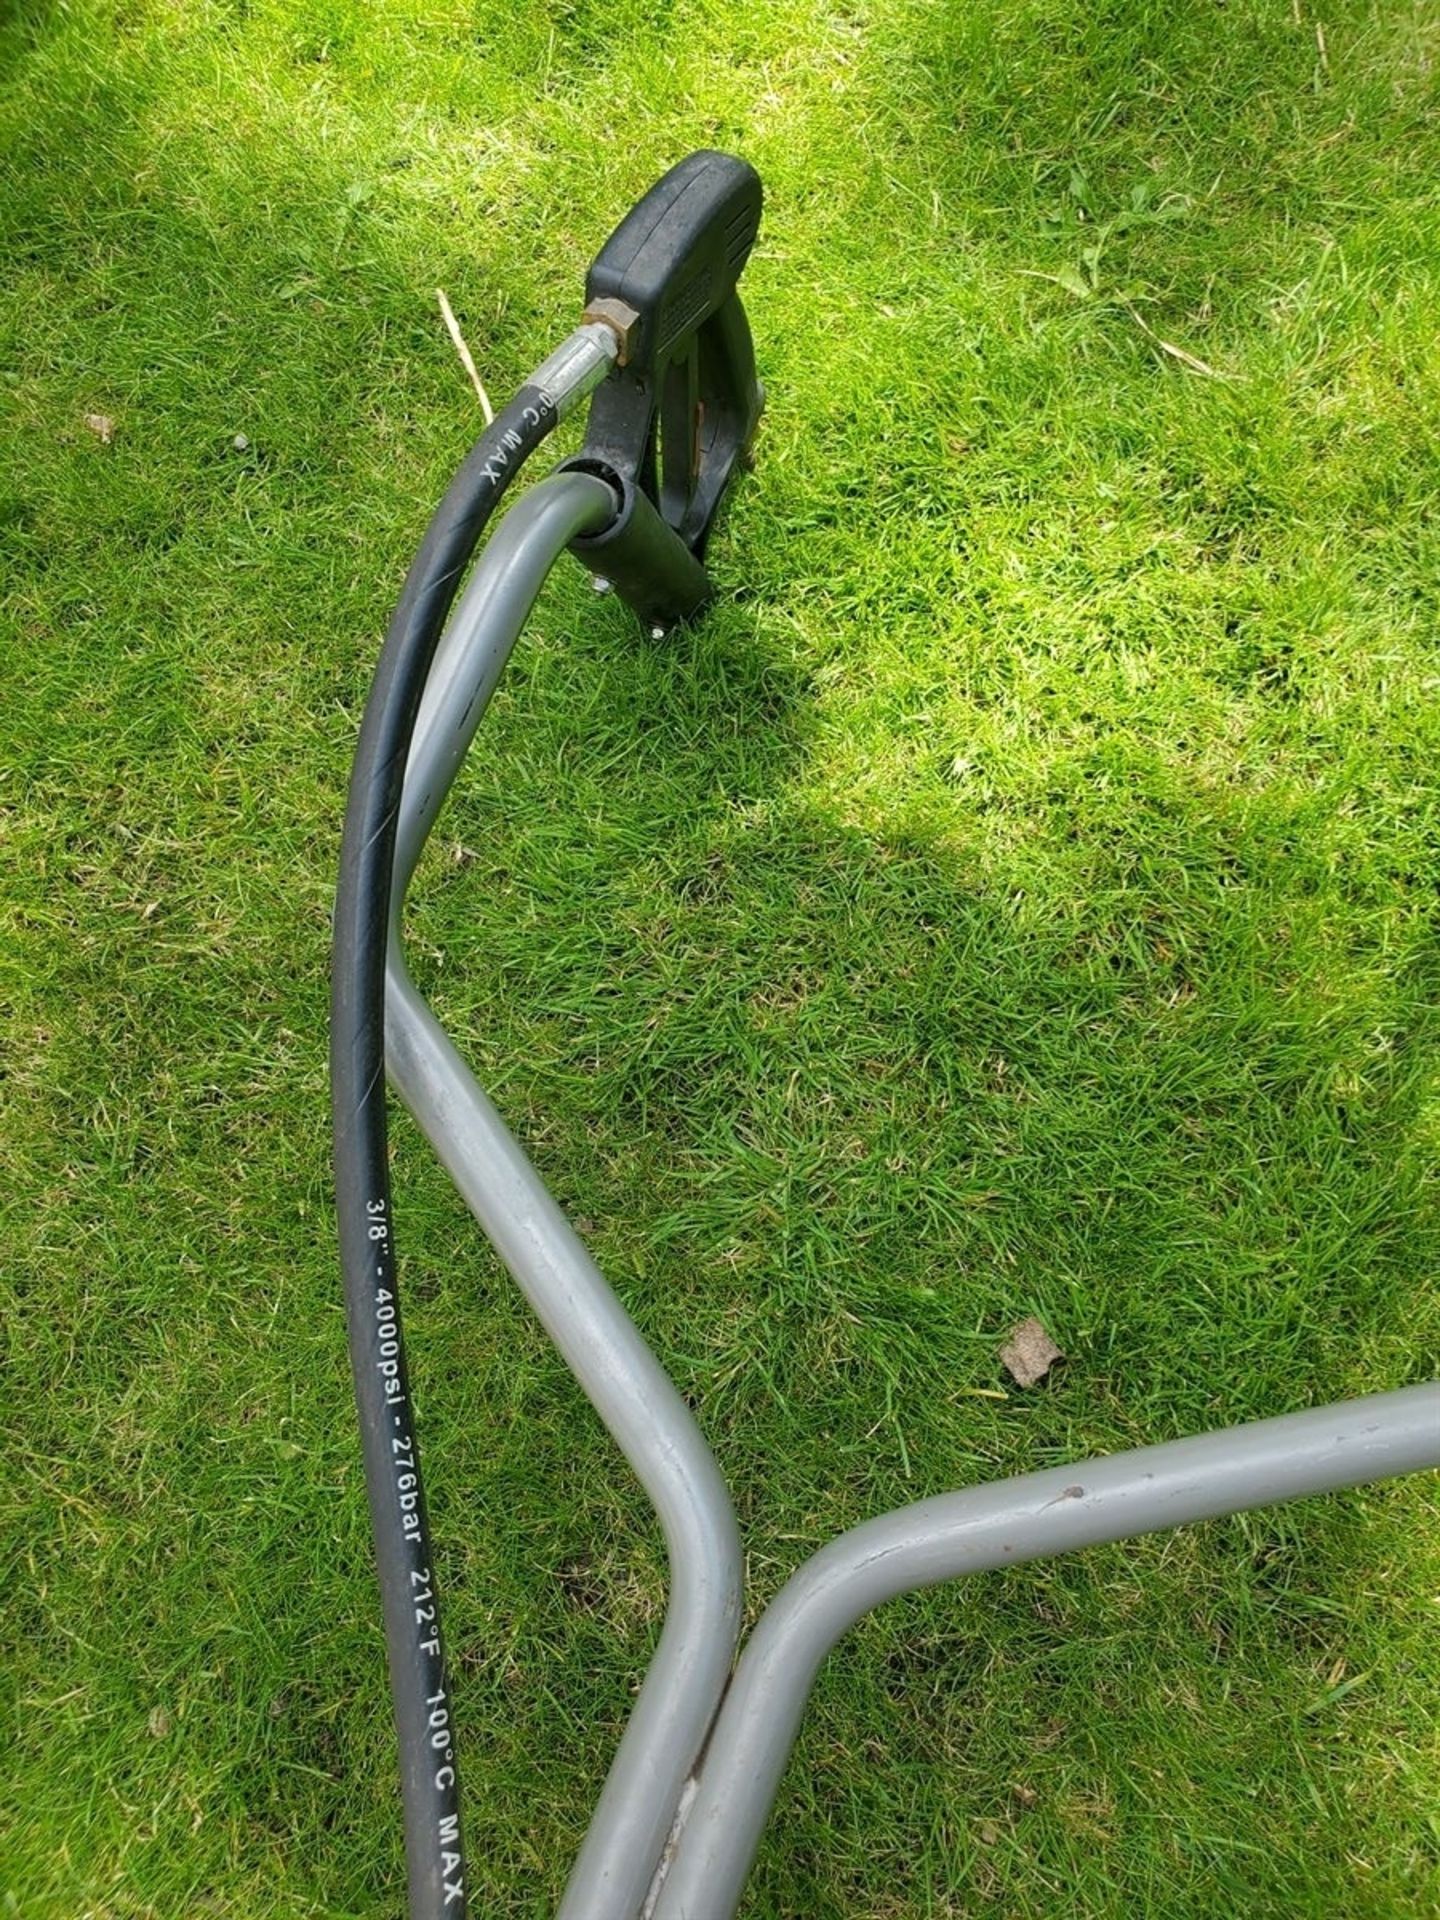 Rutland Pumps Pressure Washer with Pipes - Image 11 of 12